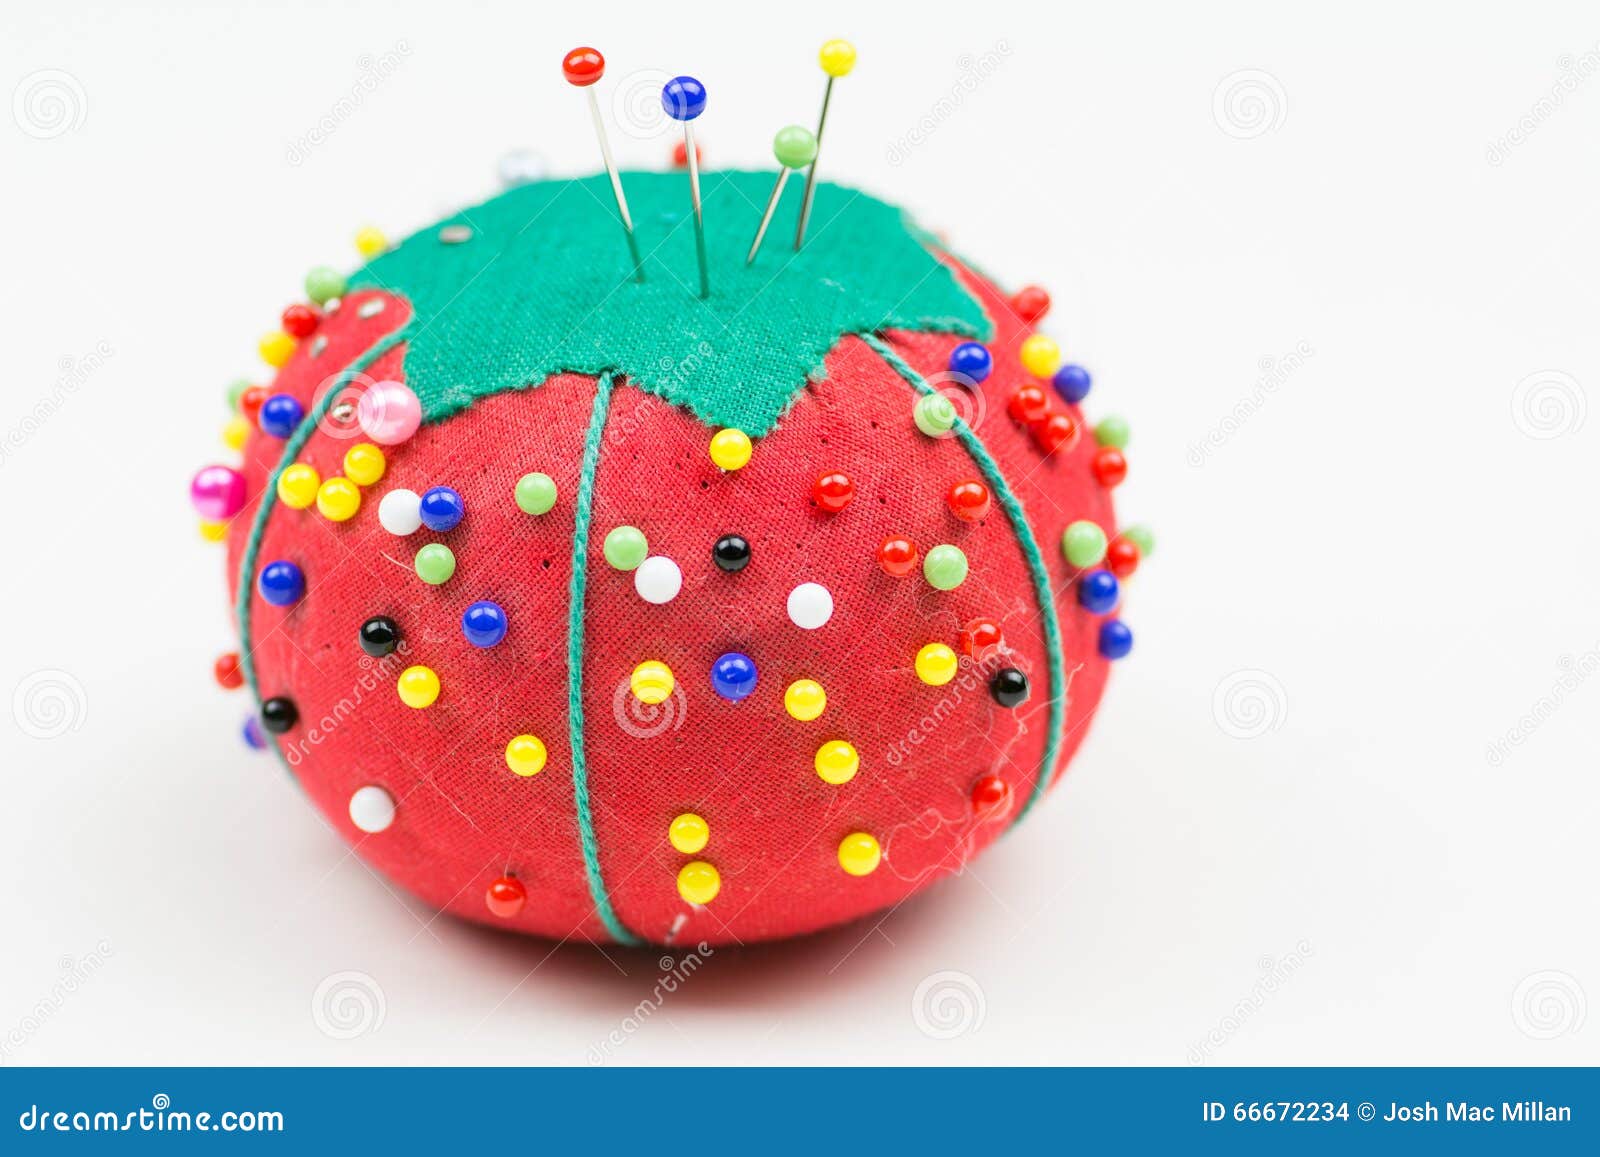 Tomato Pin Cushion Stock Photo Image Of Sewing Home